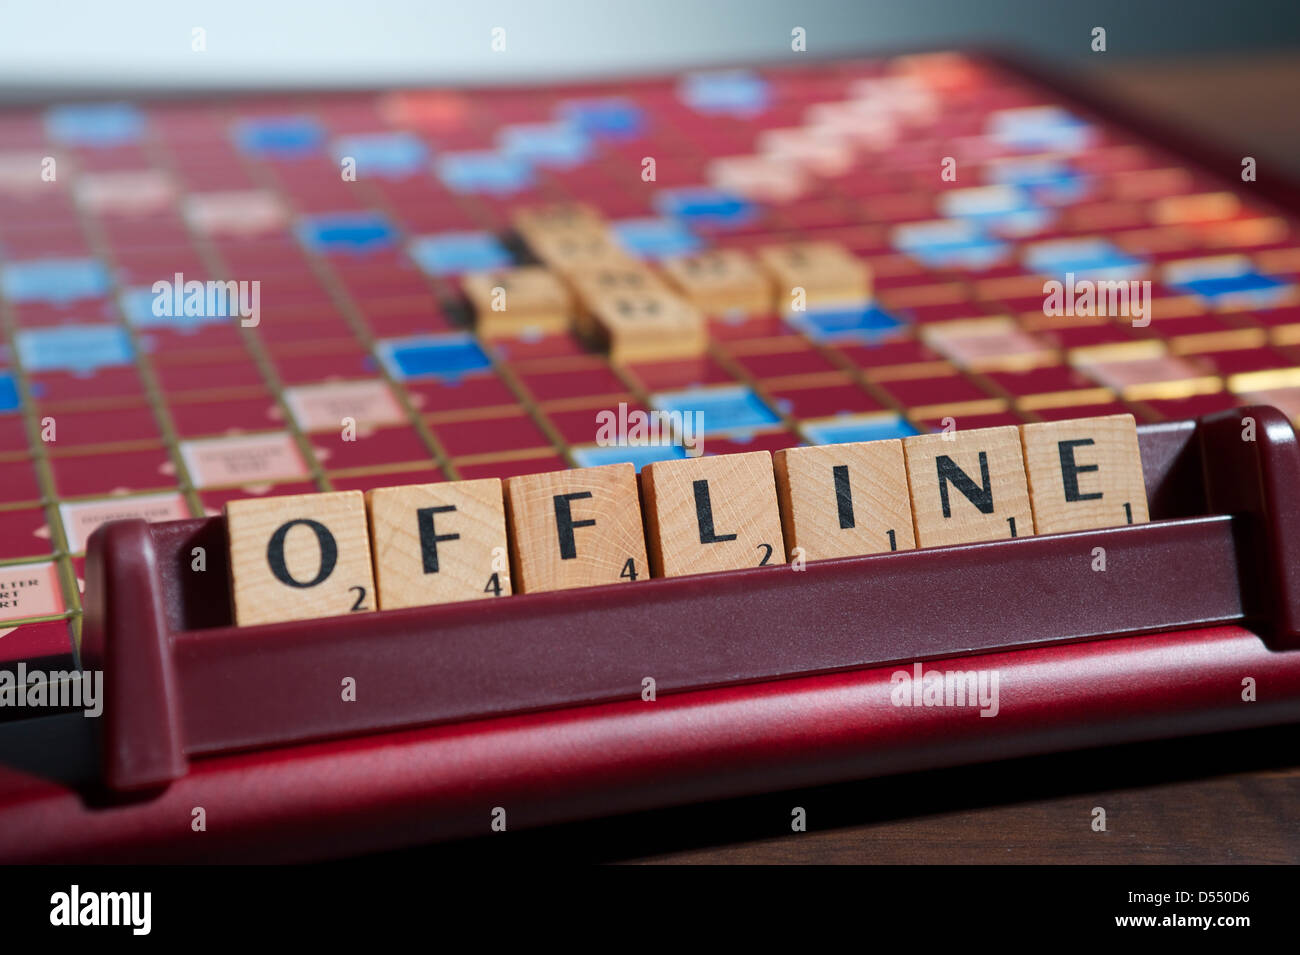 Hamburg, Germany, Scrabble letters form the word OFFLINE Stock Photo